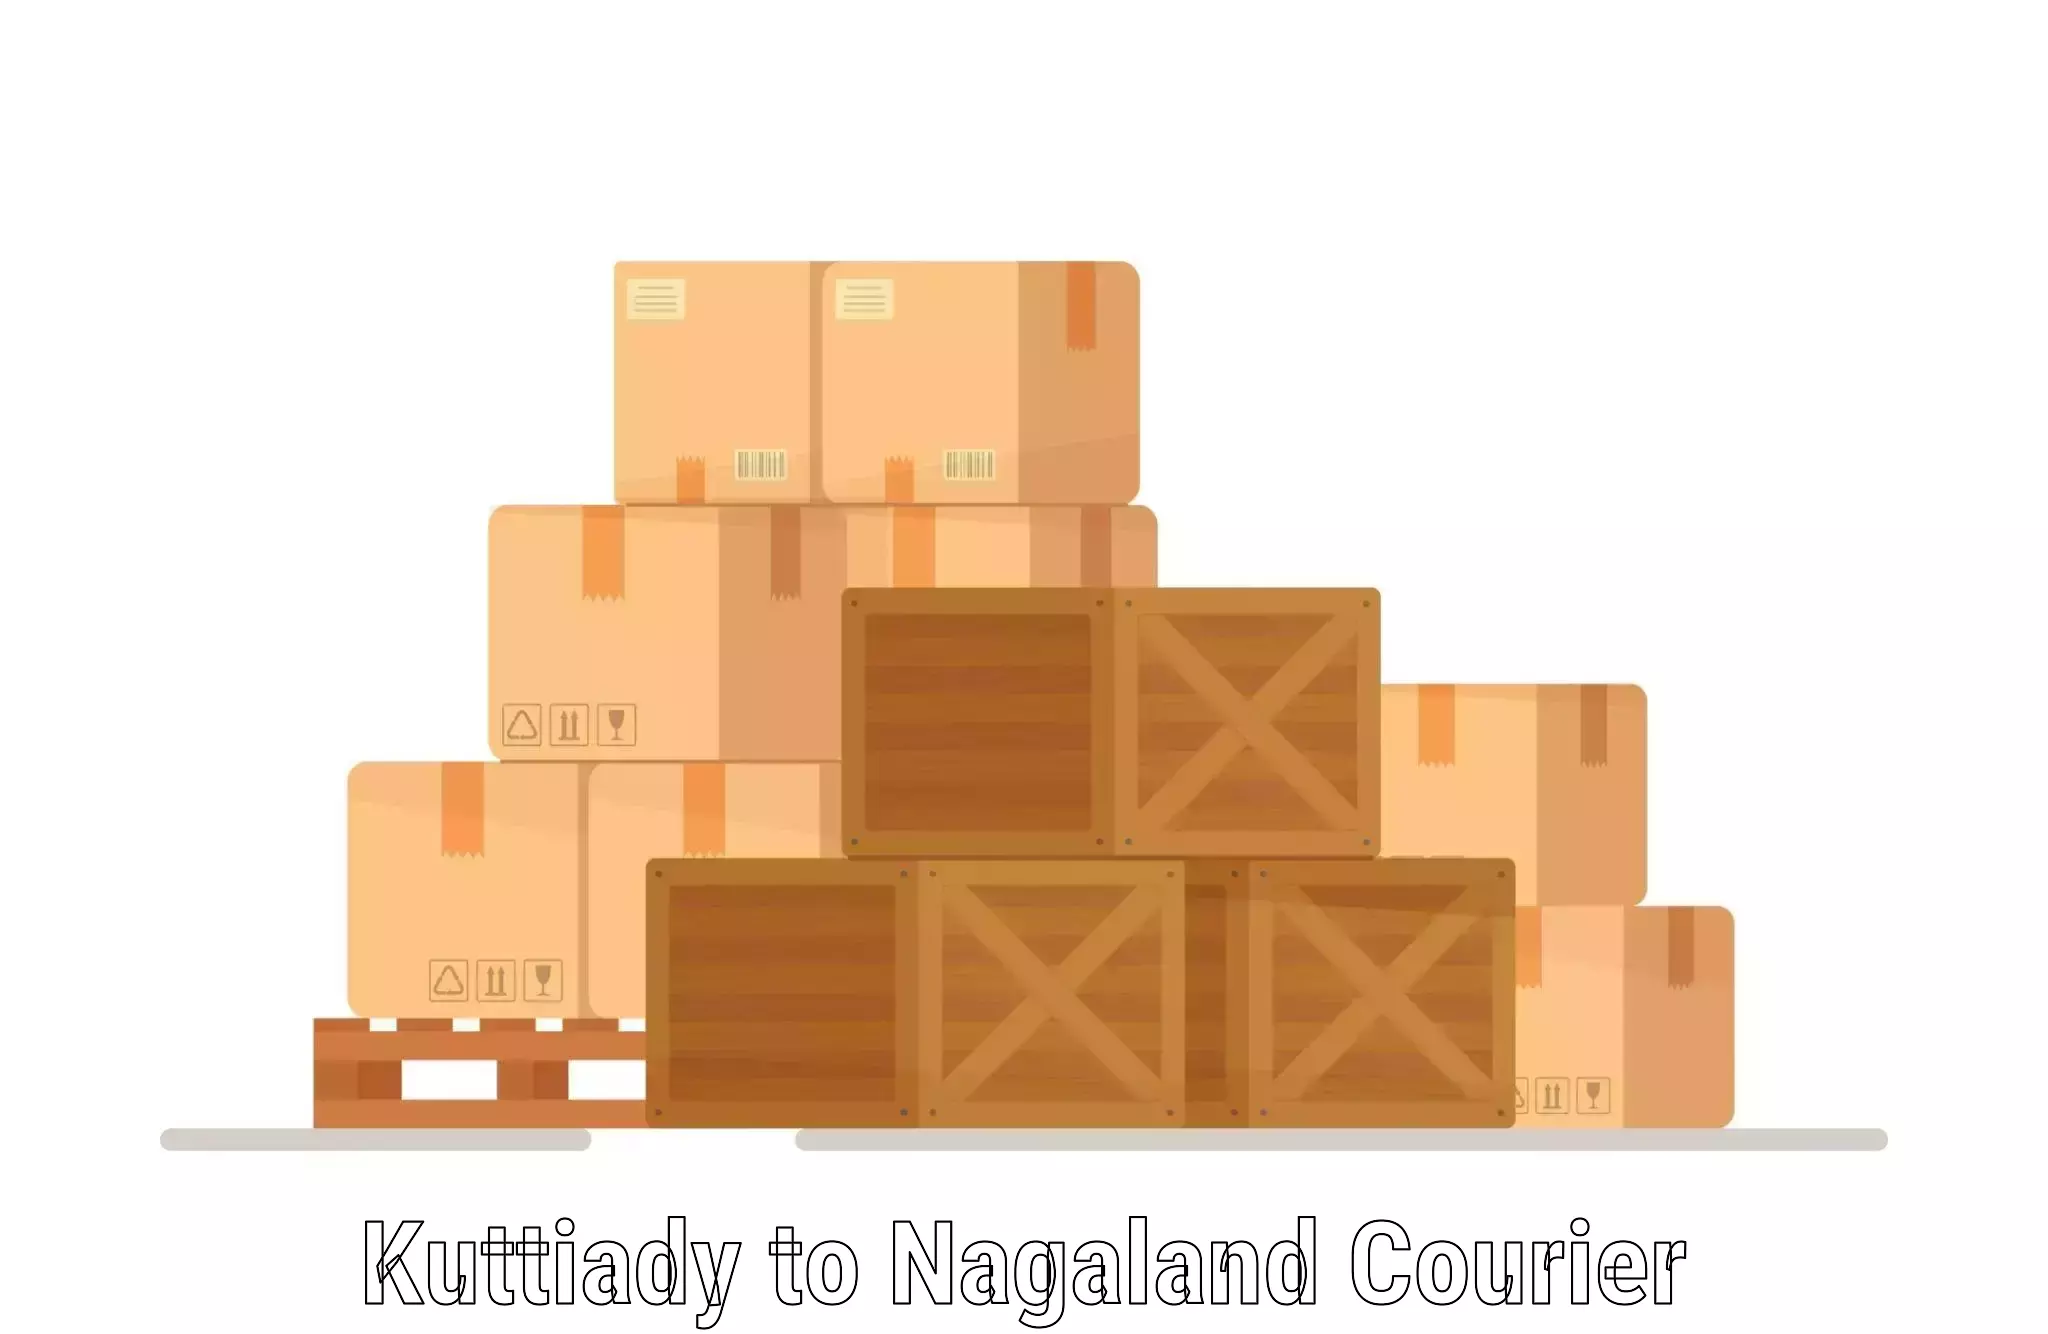 State-of-the-art courier technology Kuttiady to NIT Nagaland